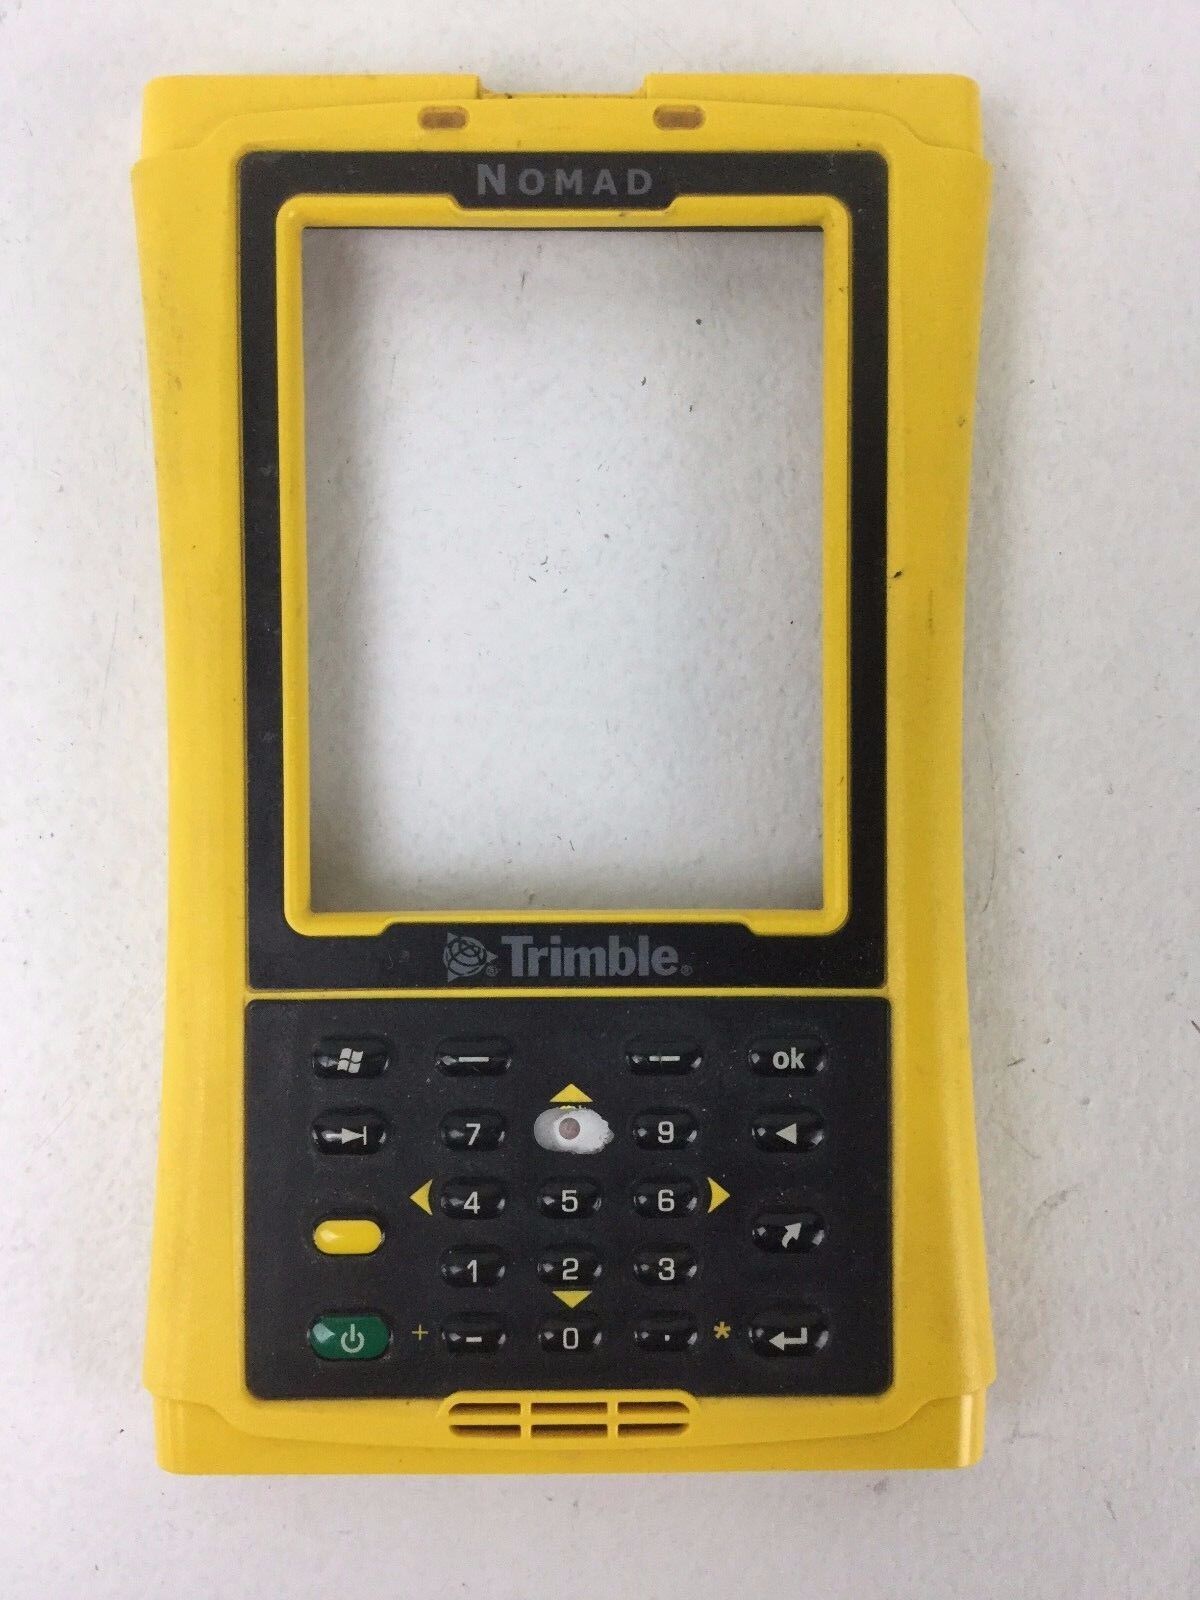 Trimble Nomad N324 Front Cover with Key Pad (1 key missing) -Listing for one cov